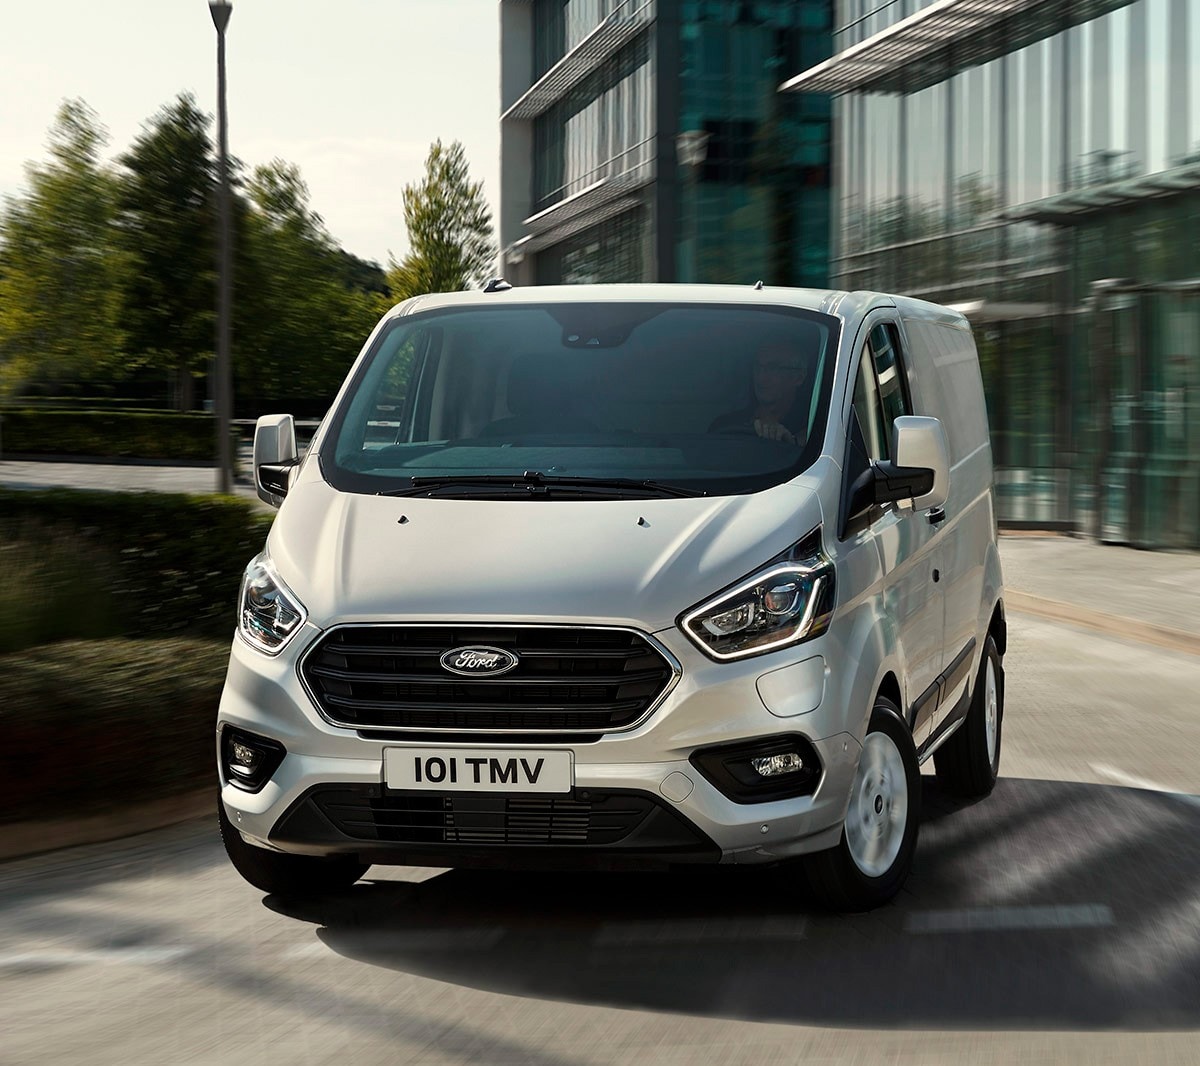 Silver Ford Transit Custom driving in front of glass building